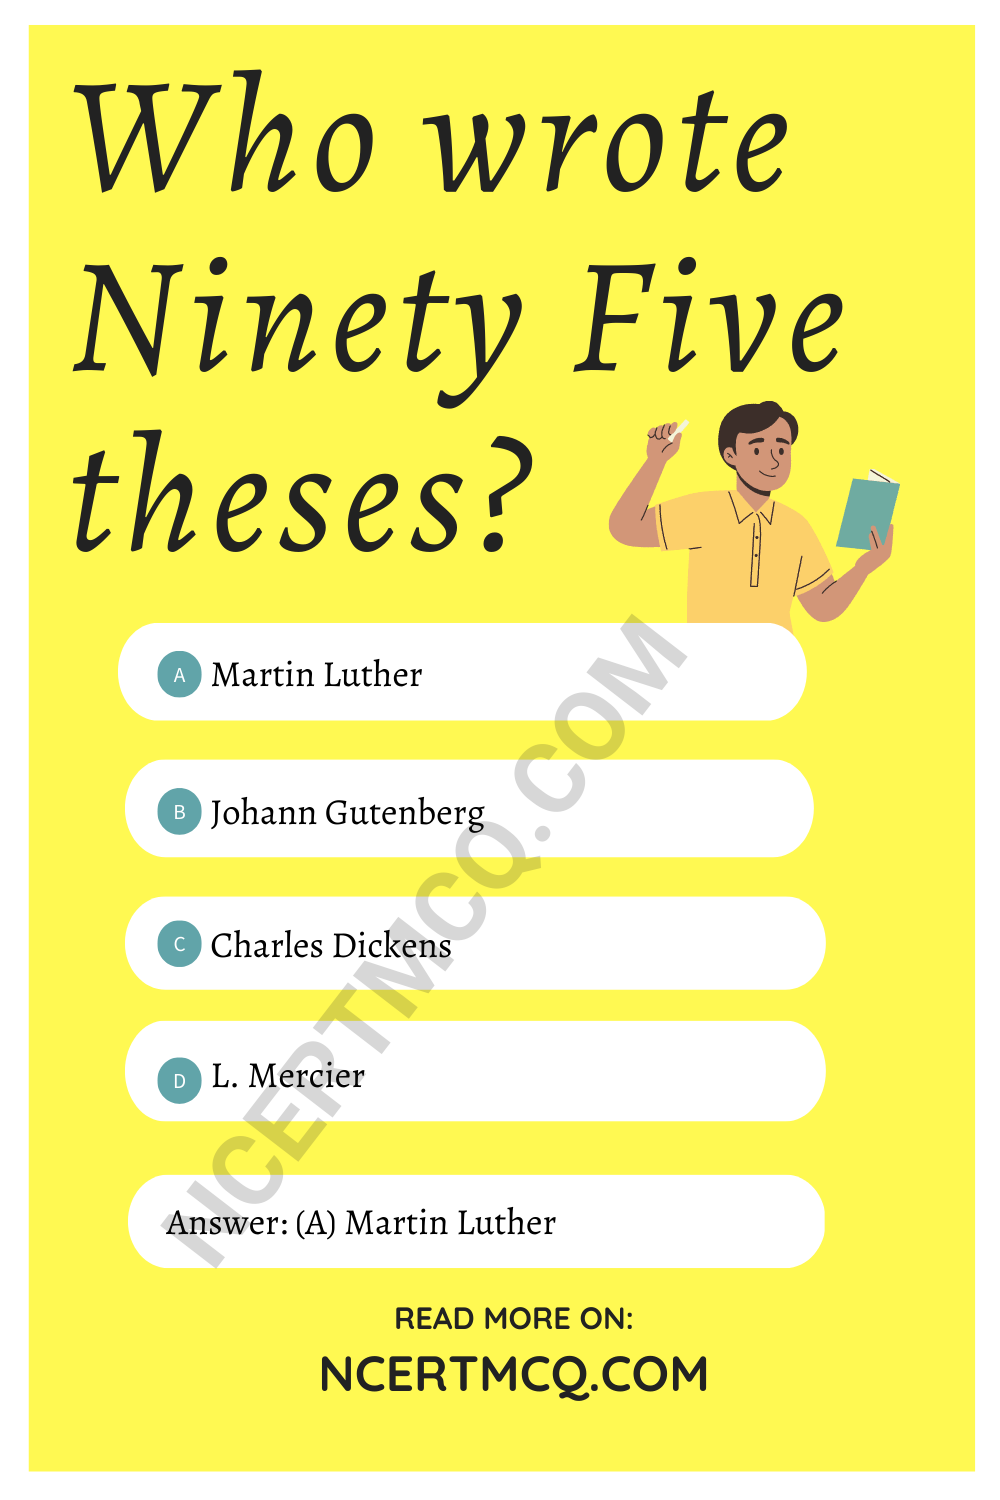 Who wrote Ninety Five theses?